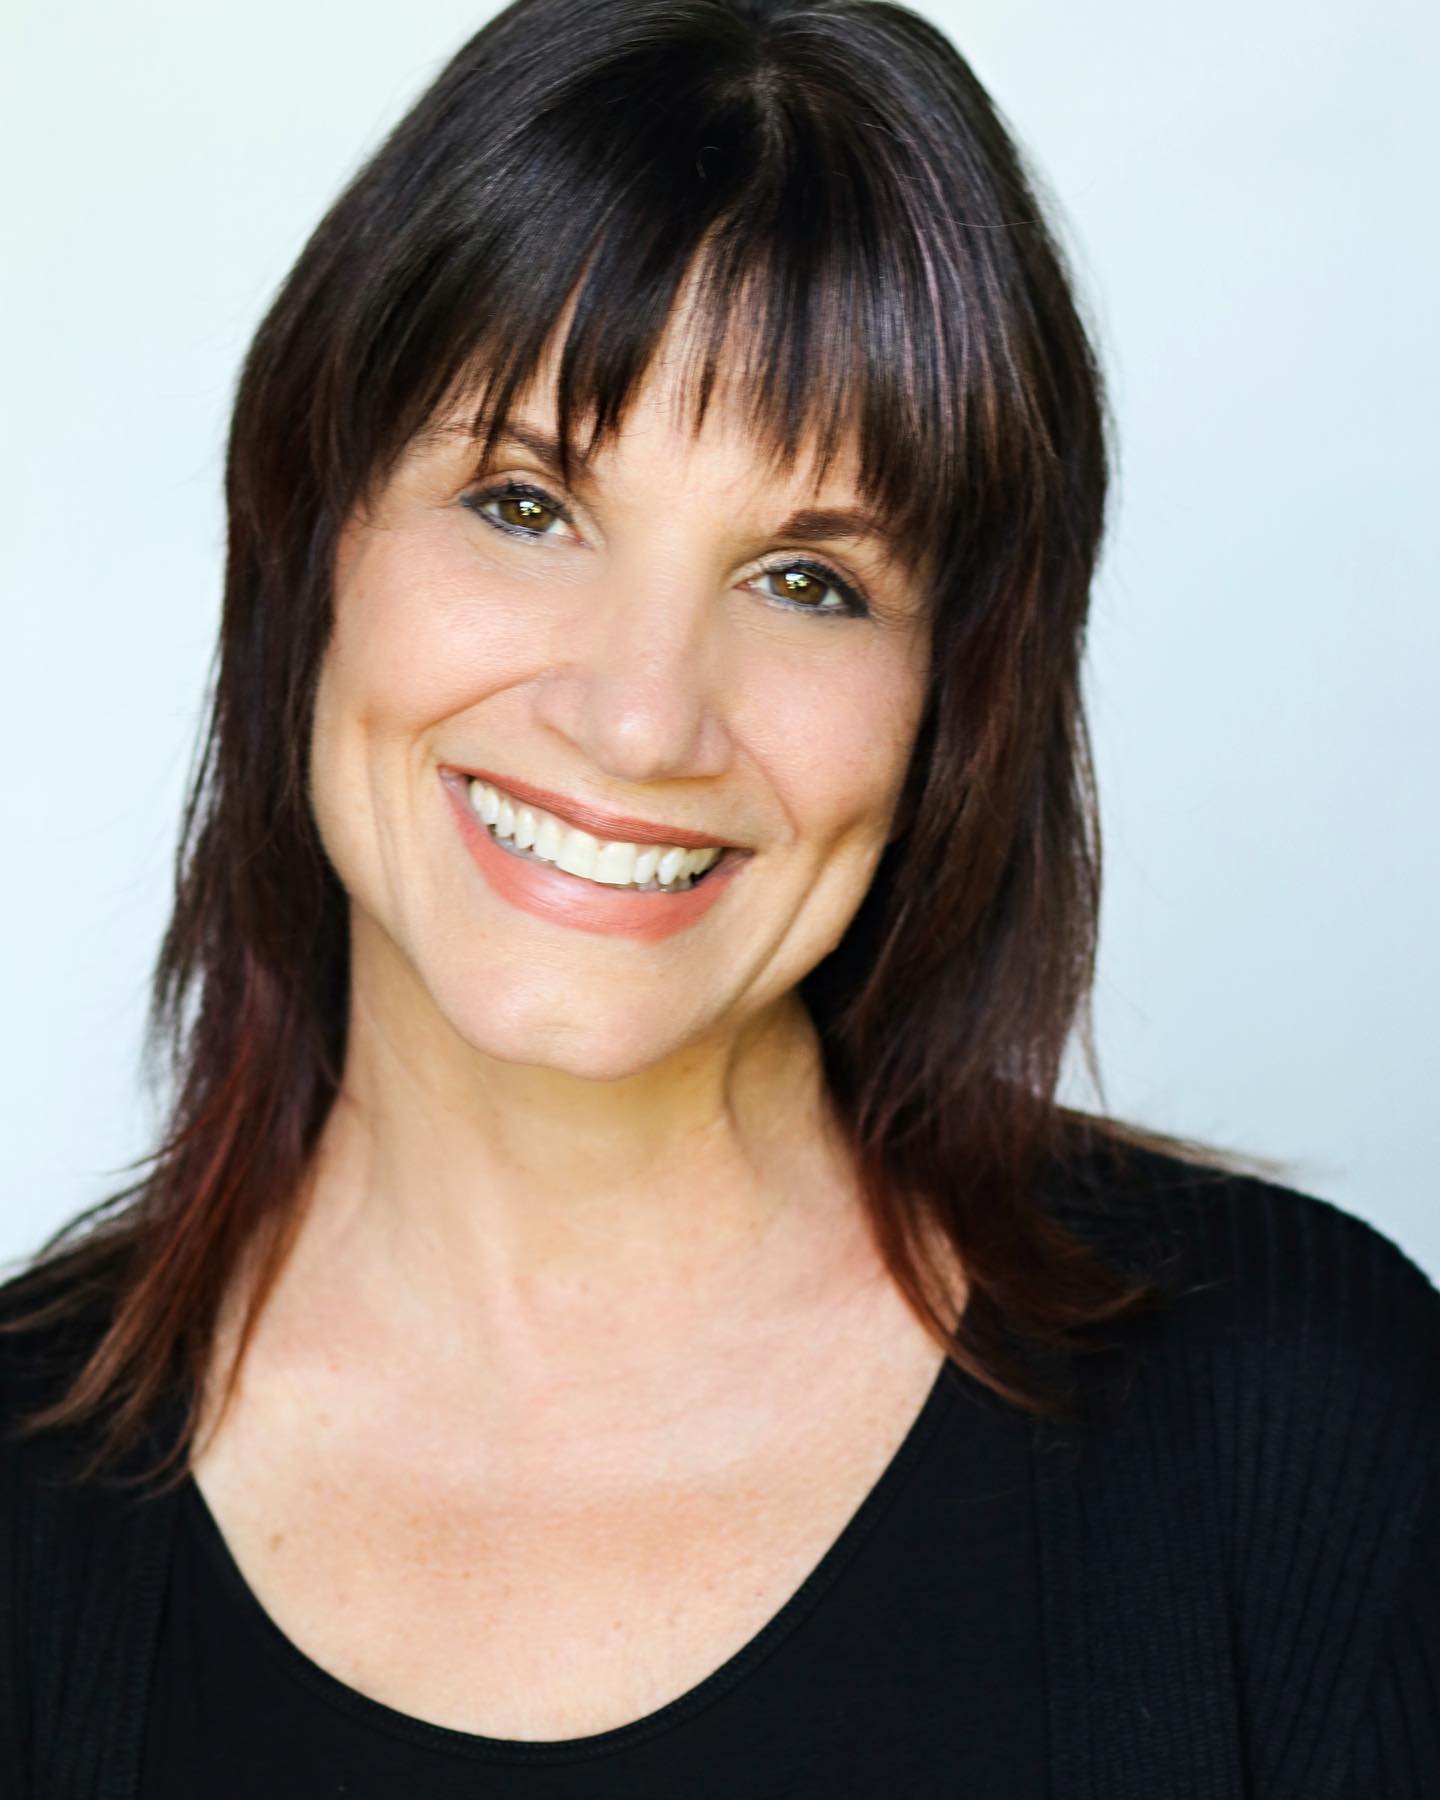 Photo of woman with dark hair and black shirt